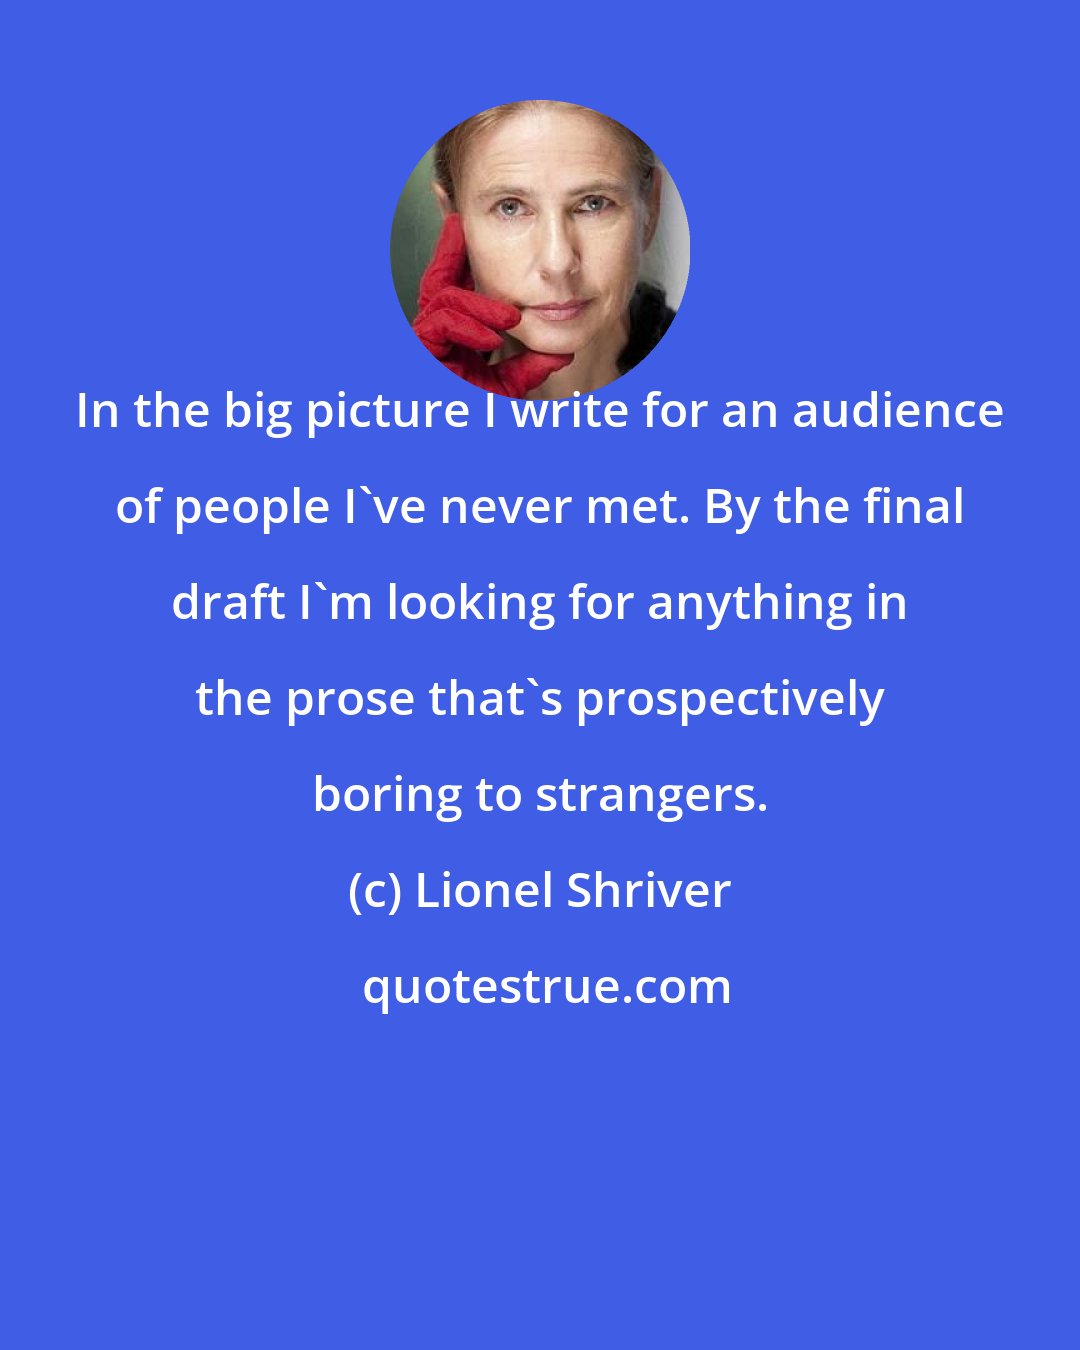 Lionel Shriver: In the big picture I write for an audience of people I've never met. By the final draft I'm looking for anything in the prose that's prospectively boring to strangers.